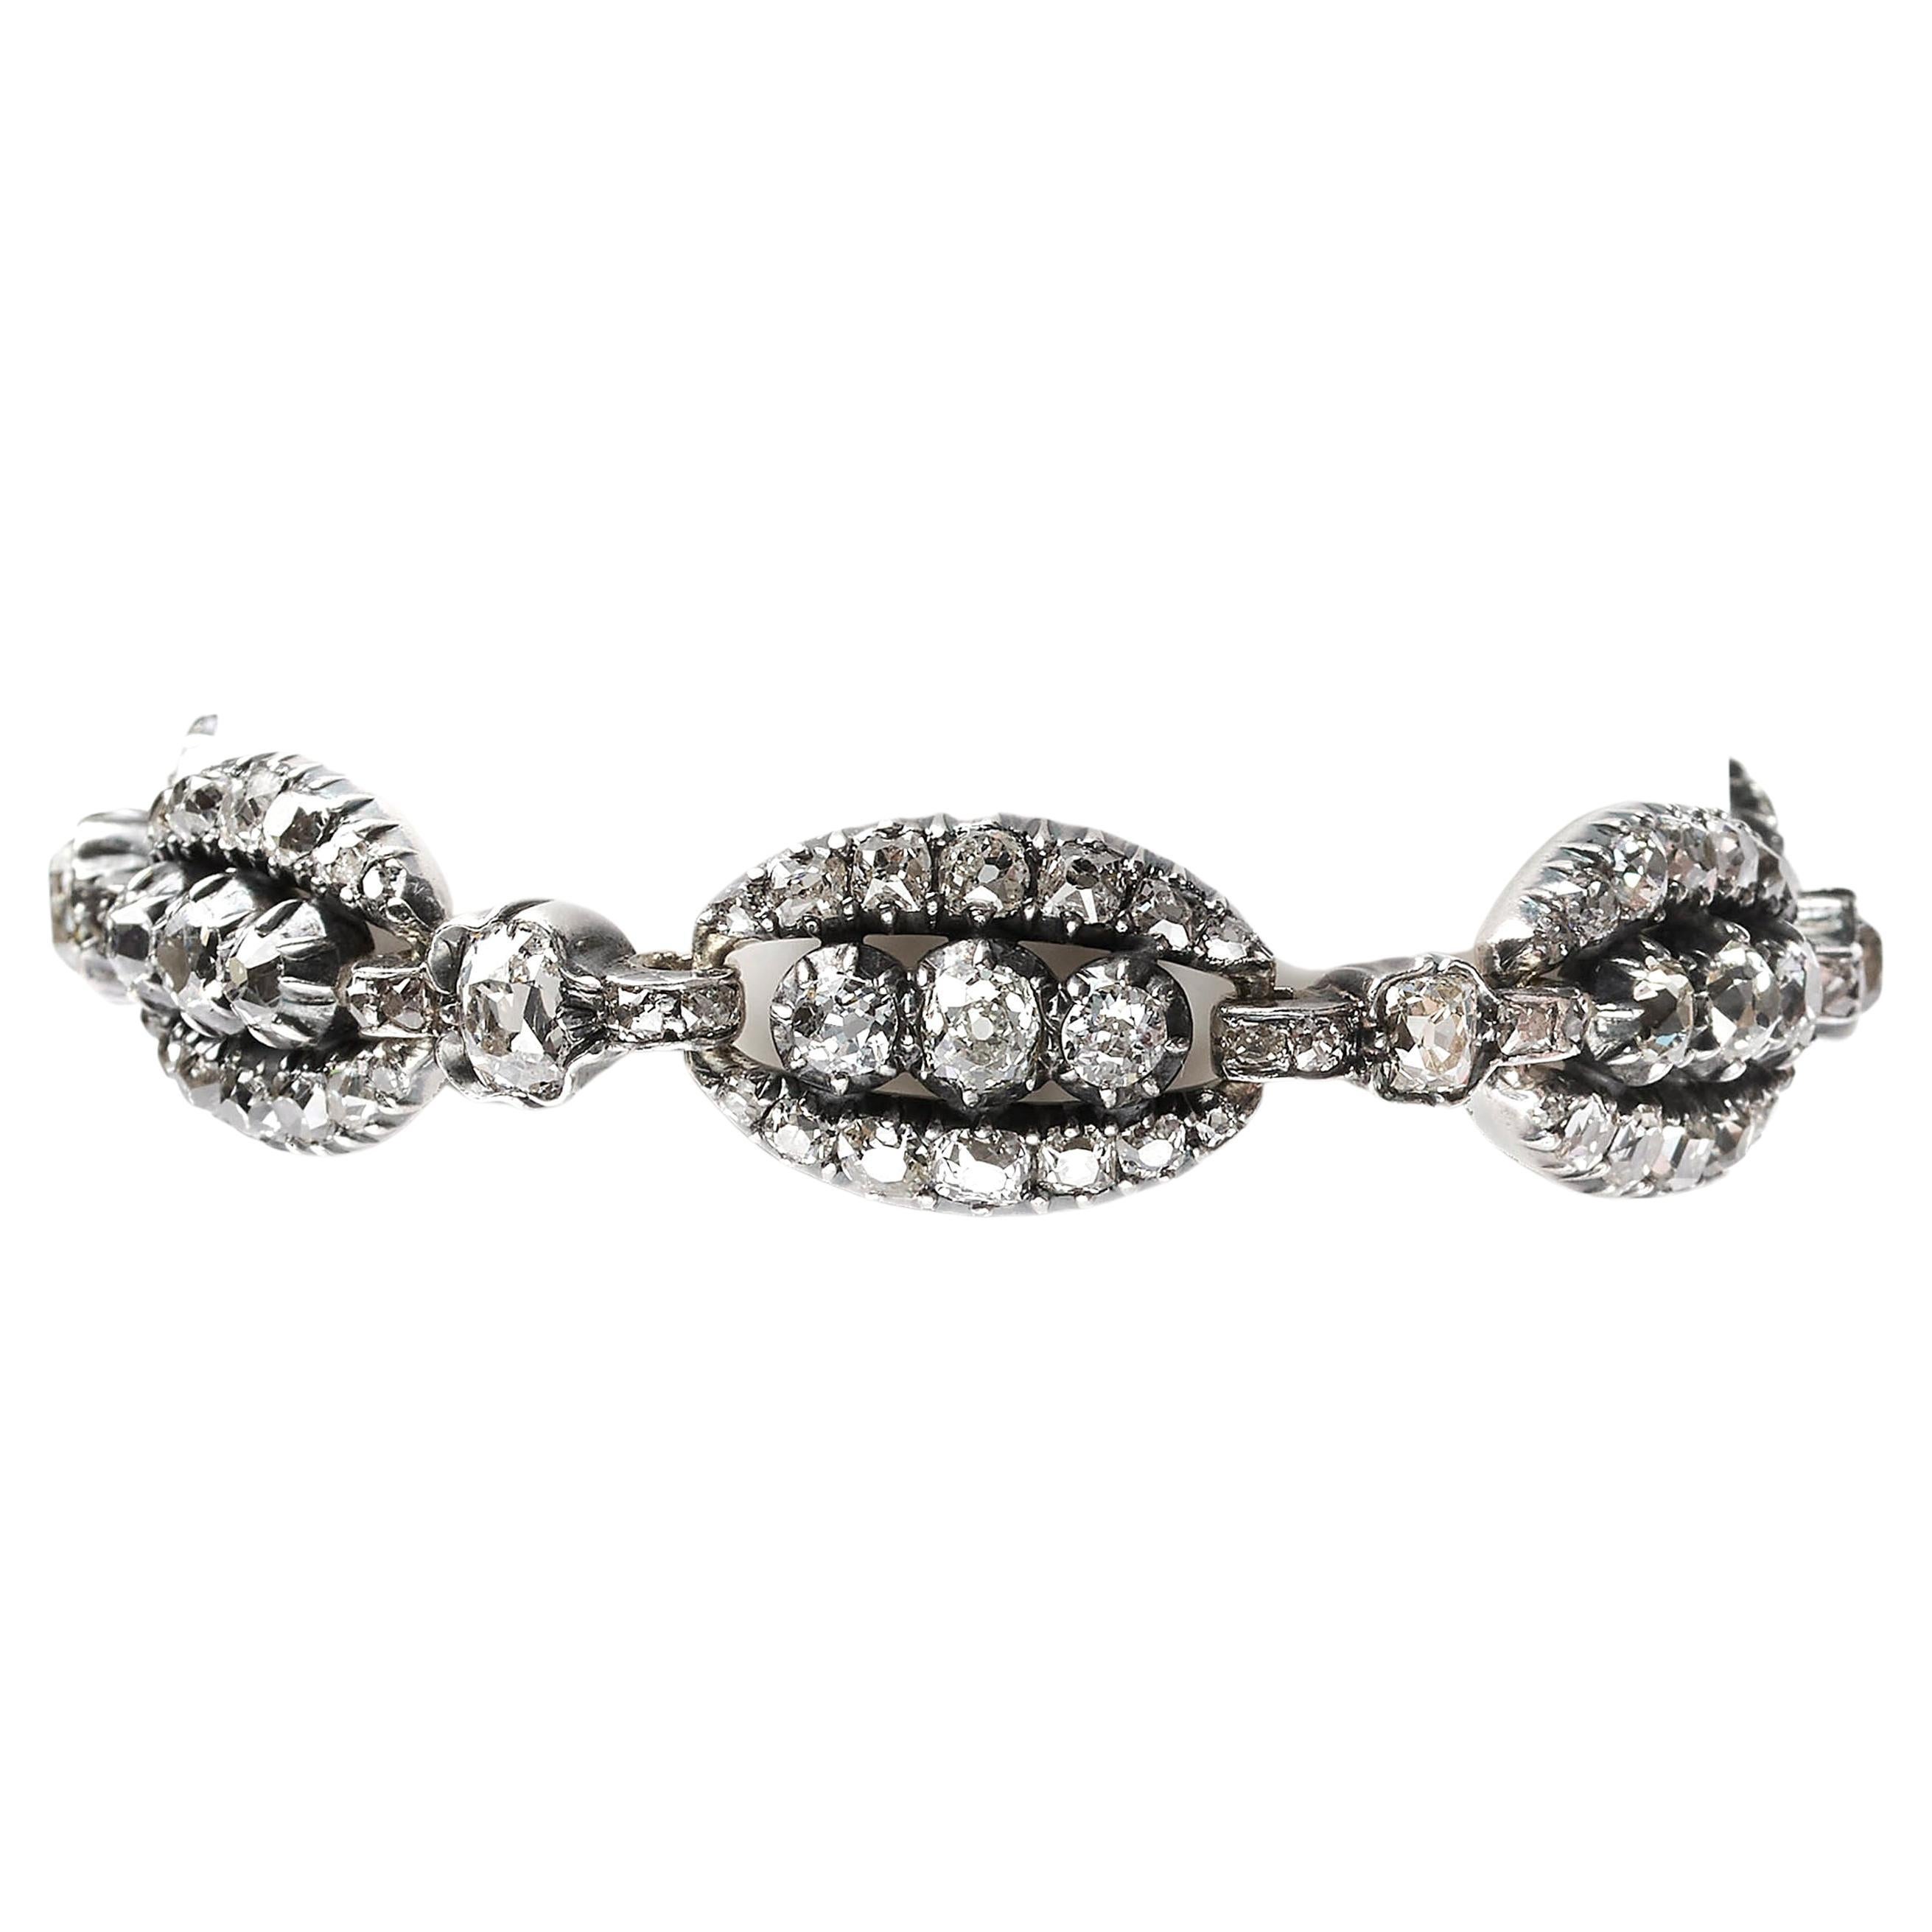 Victorian Diamond and Silver Upon Gold Bracelet, 10.50ct, Circa 1870 For Sale